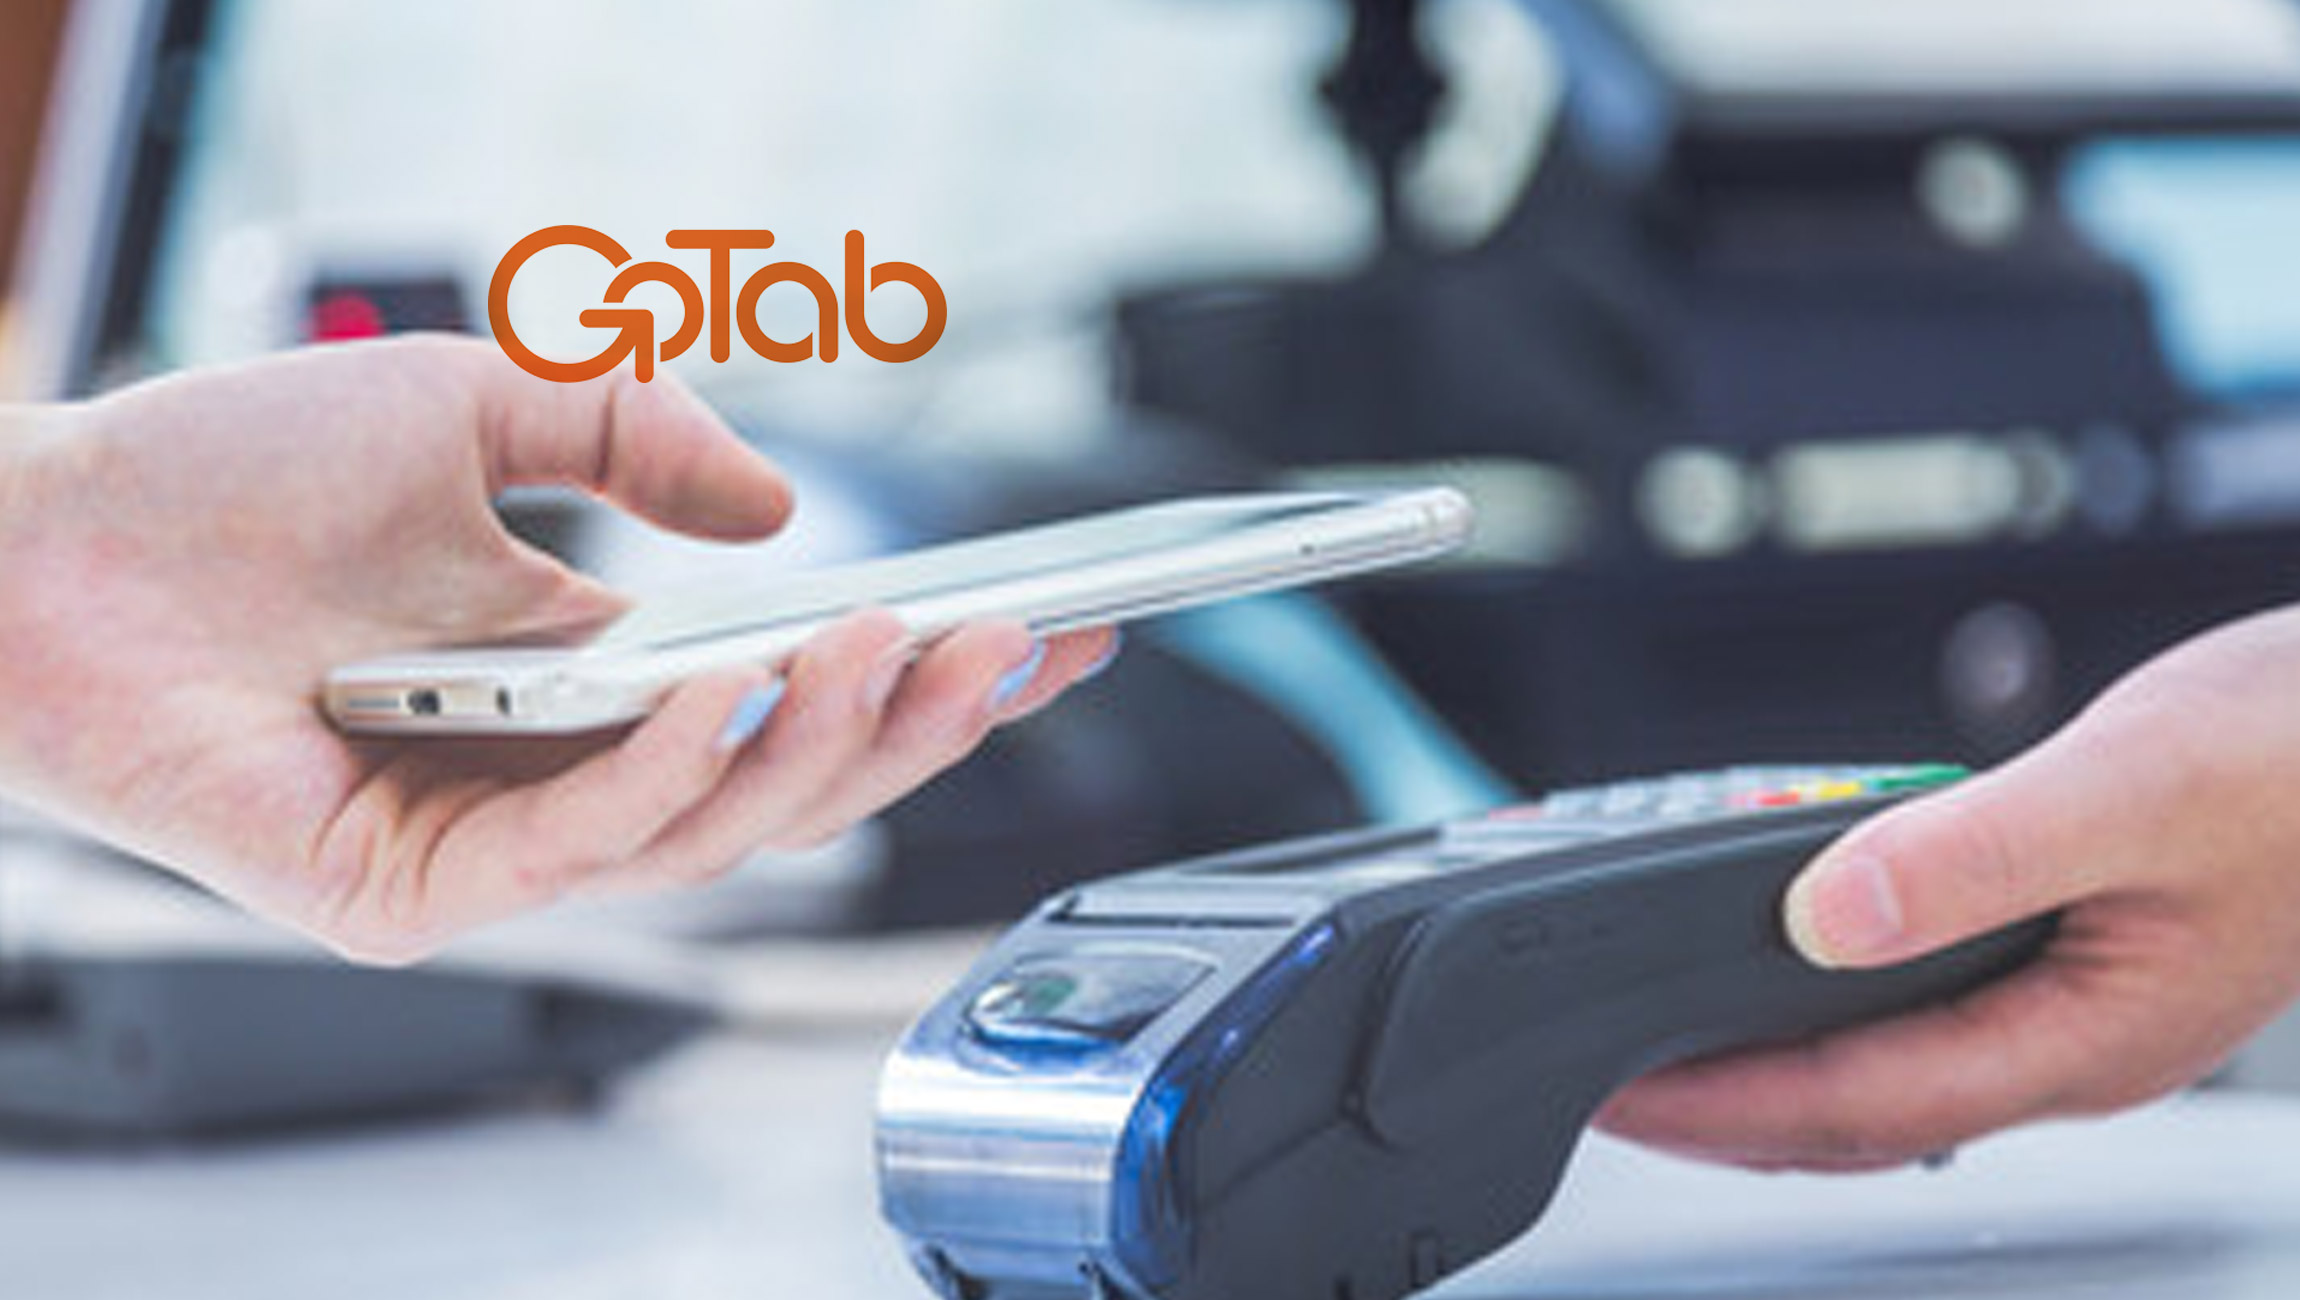 GoTab-Debuts-RFID-Mobile-Ordering-and-Payment-Solution